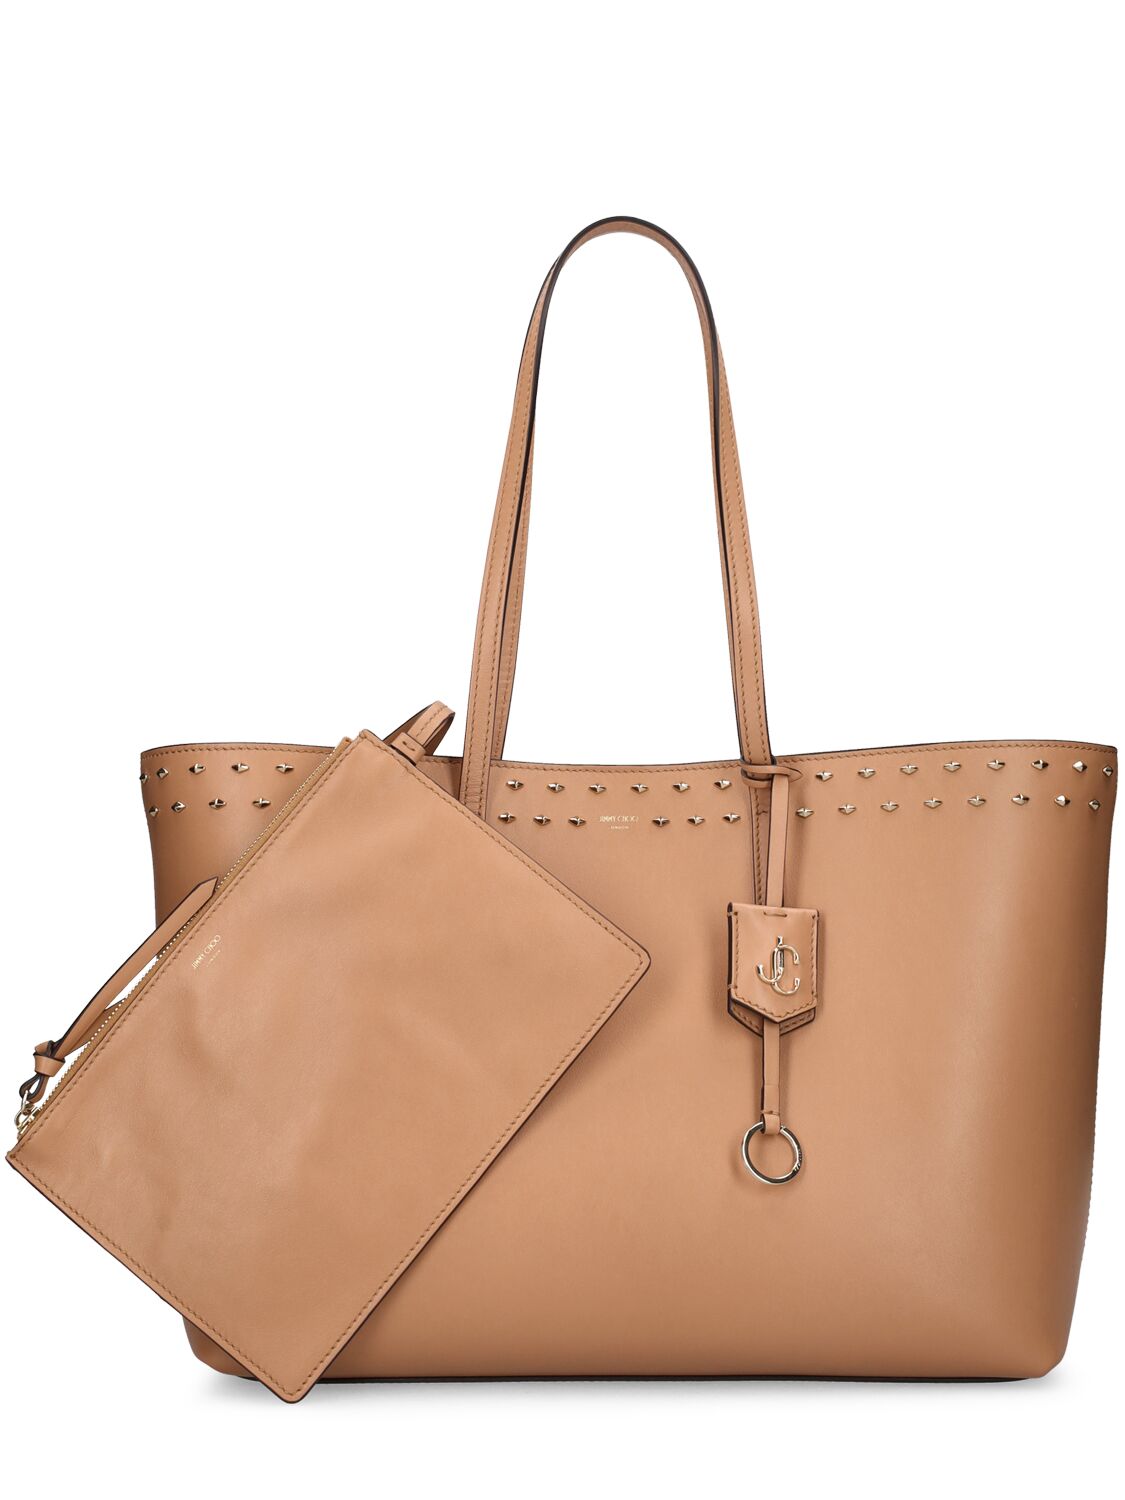 Shop Jimmy Choo Nine 2 Five Smooth Leather Tote Bag In Biscuit,gold